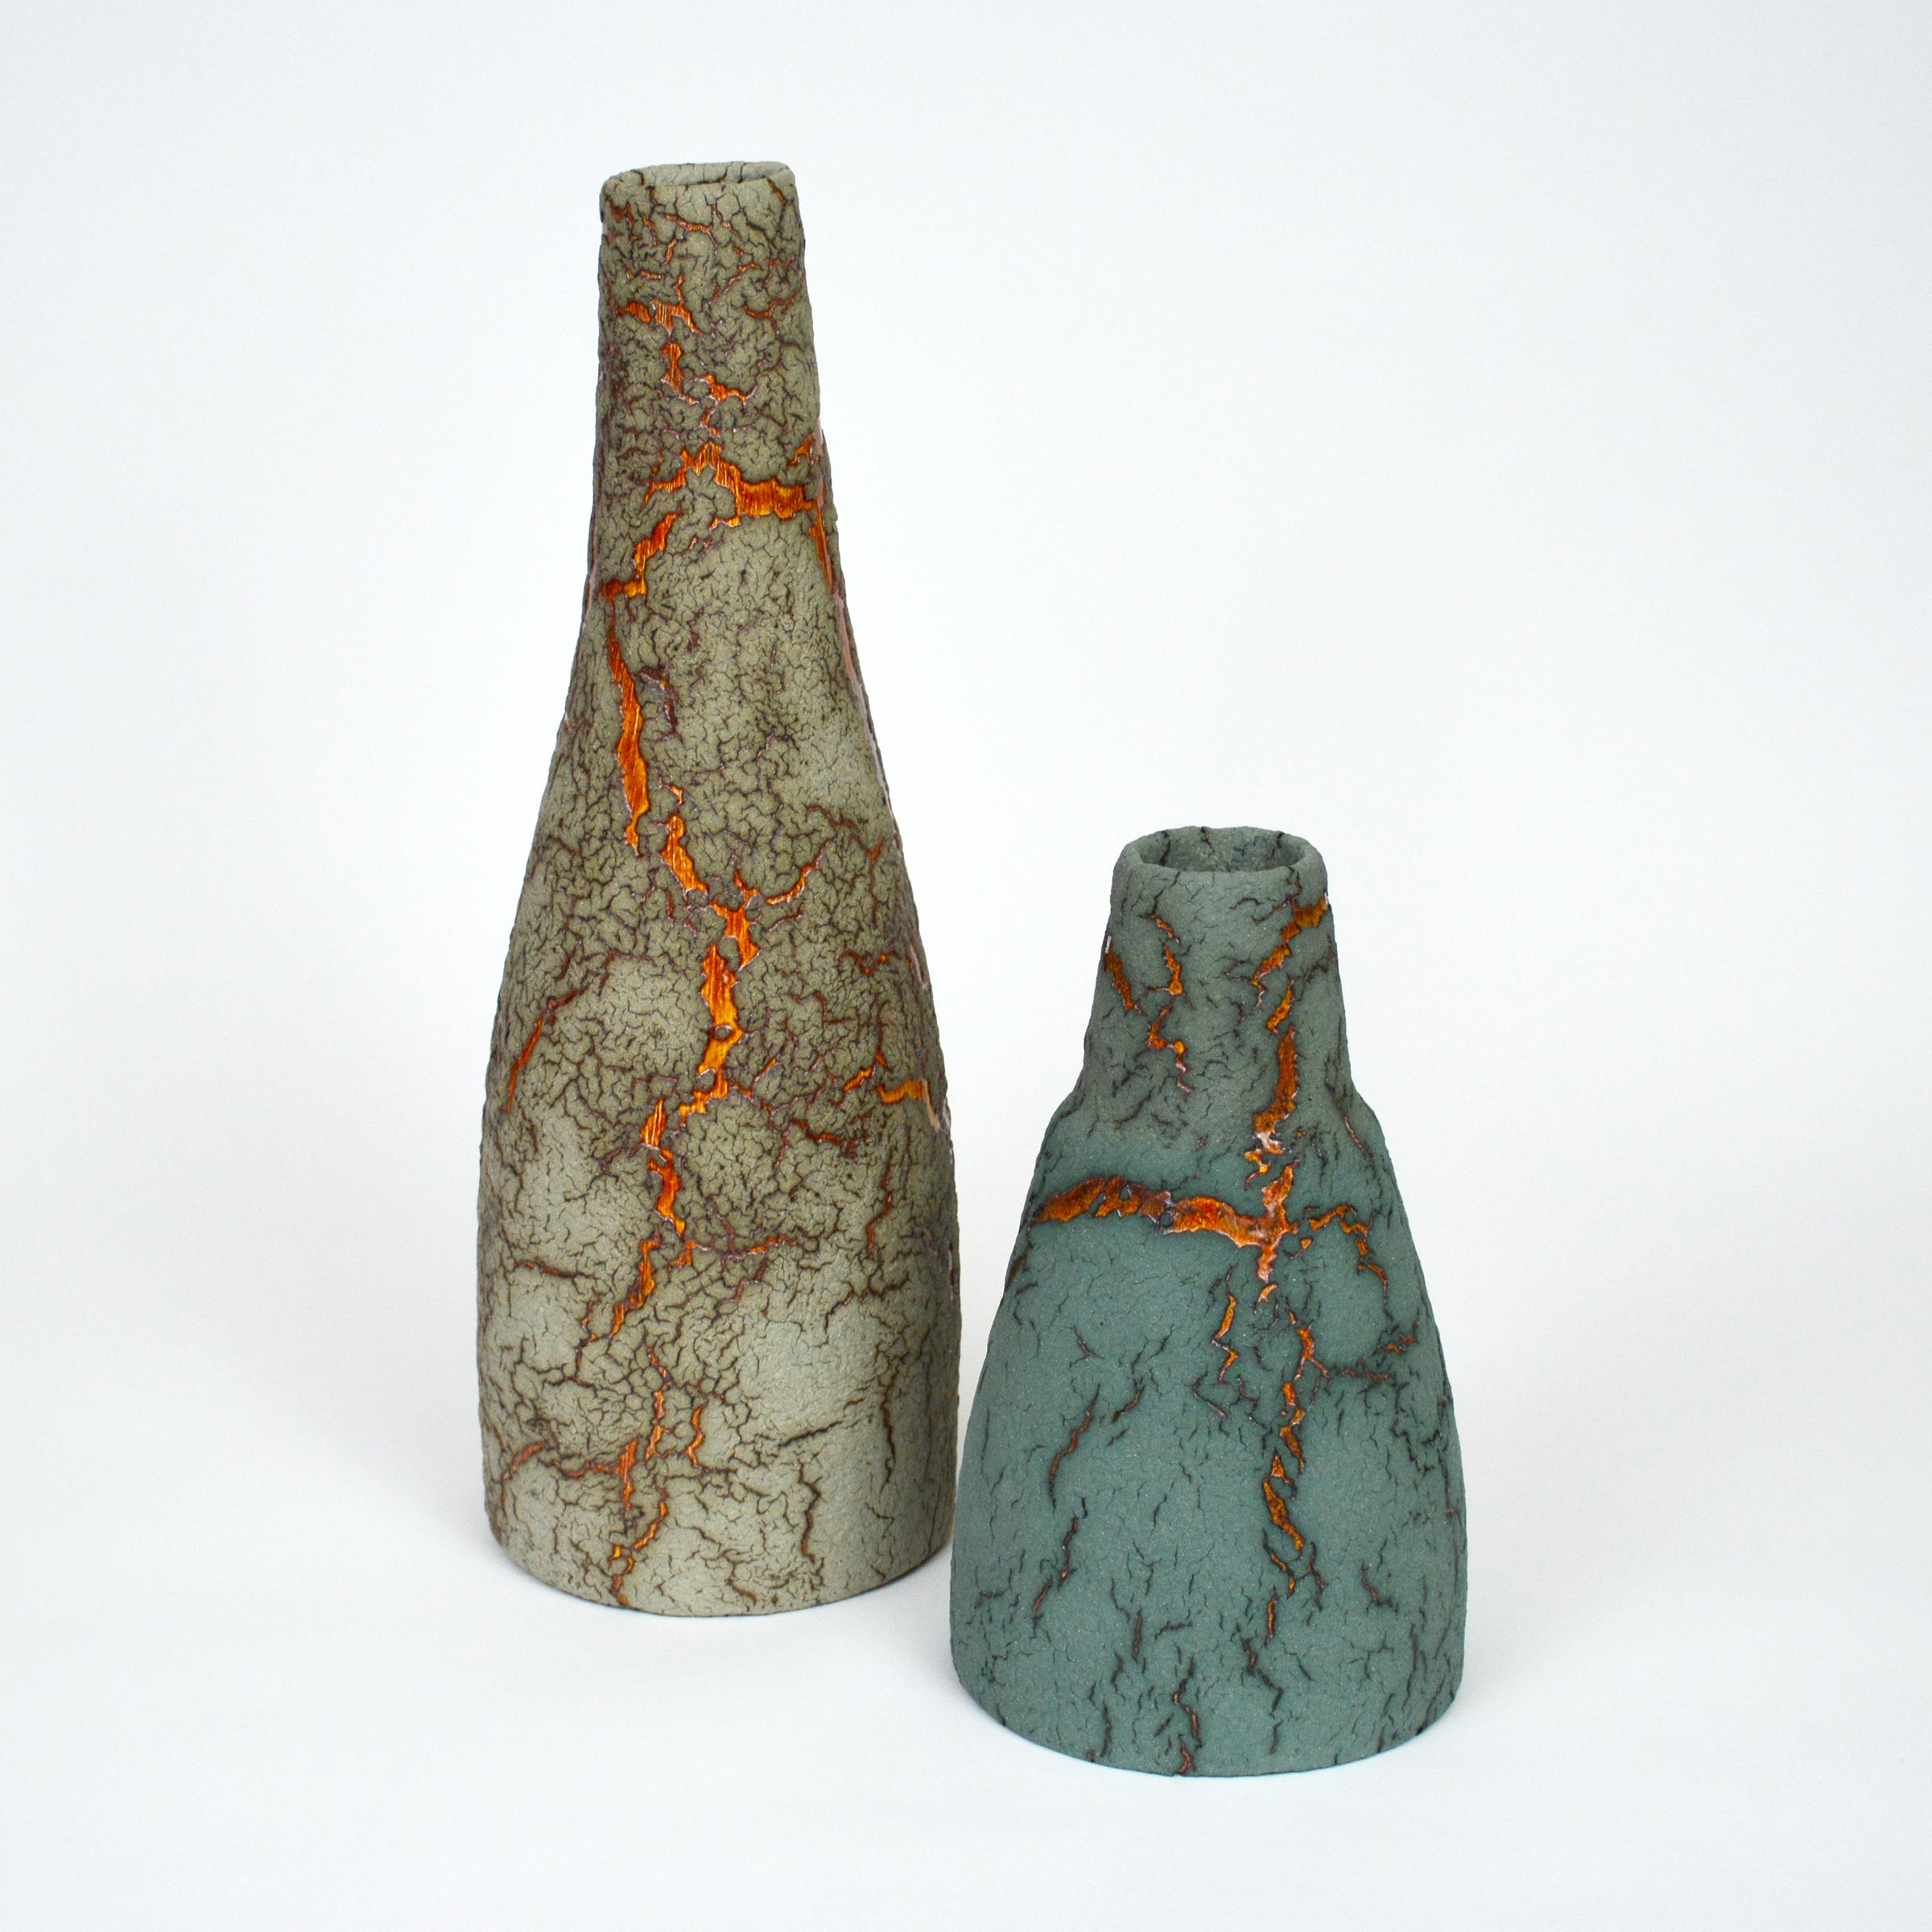 Ceramic bottles by William Edwards.
Hand built earthenware vessels, fired multiple times to achieve a textured surface of random abstraction, sage green matte with amber gloss microcrystalline glaze breaking through that sparkles in certain